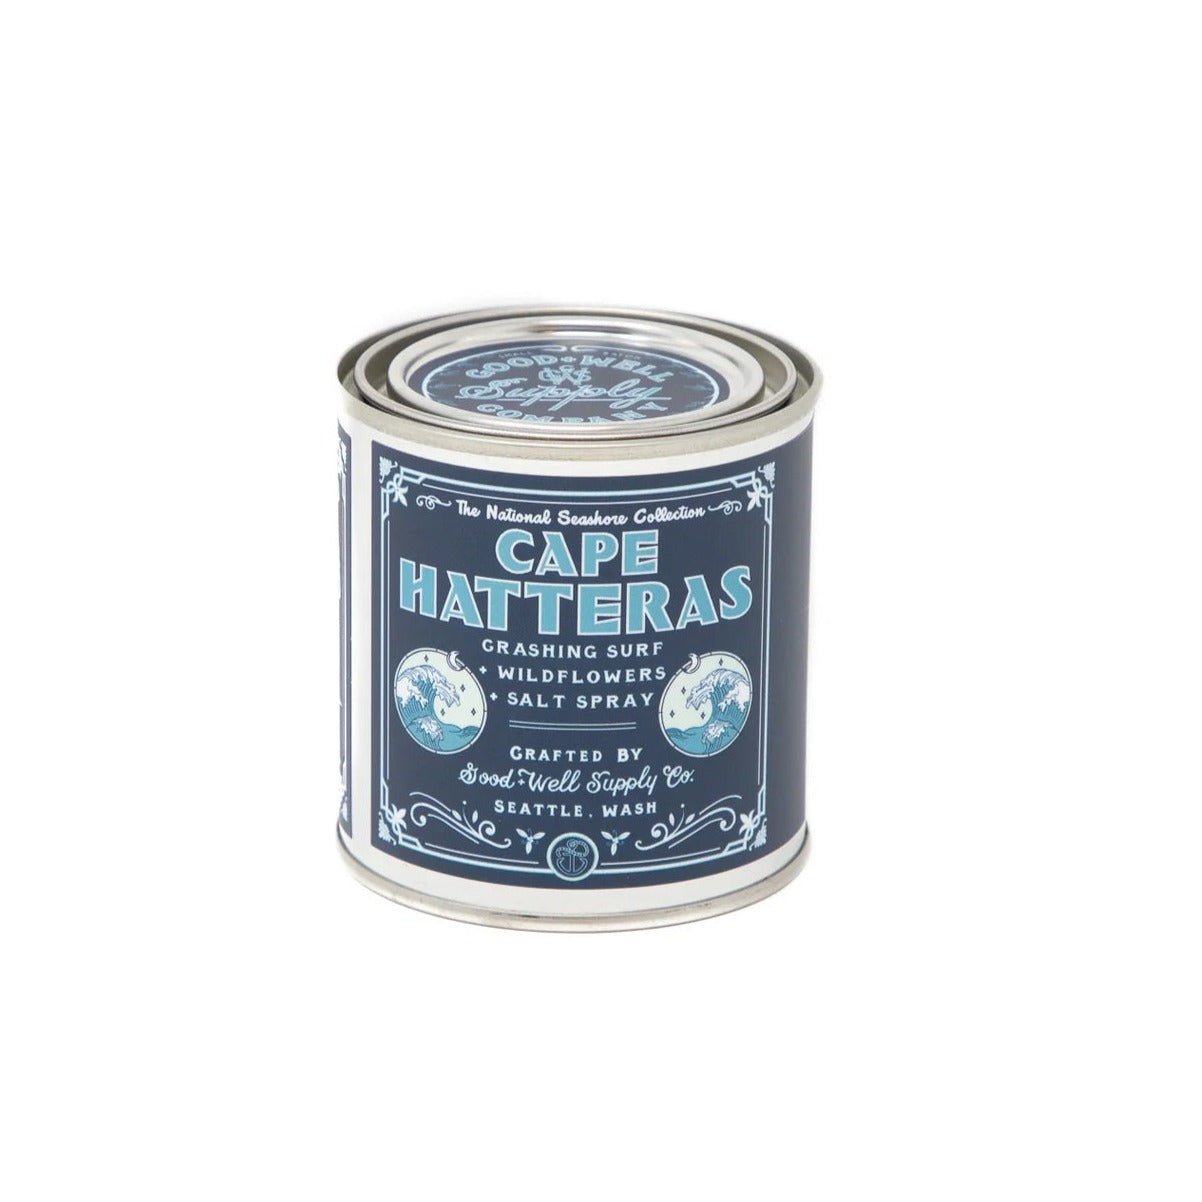 A tin of Cape Hatteras - National Seashores Candle by Good & Well Supply Co..